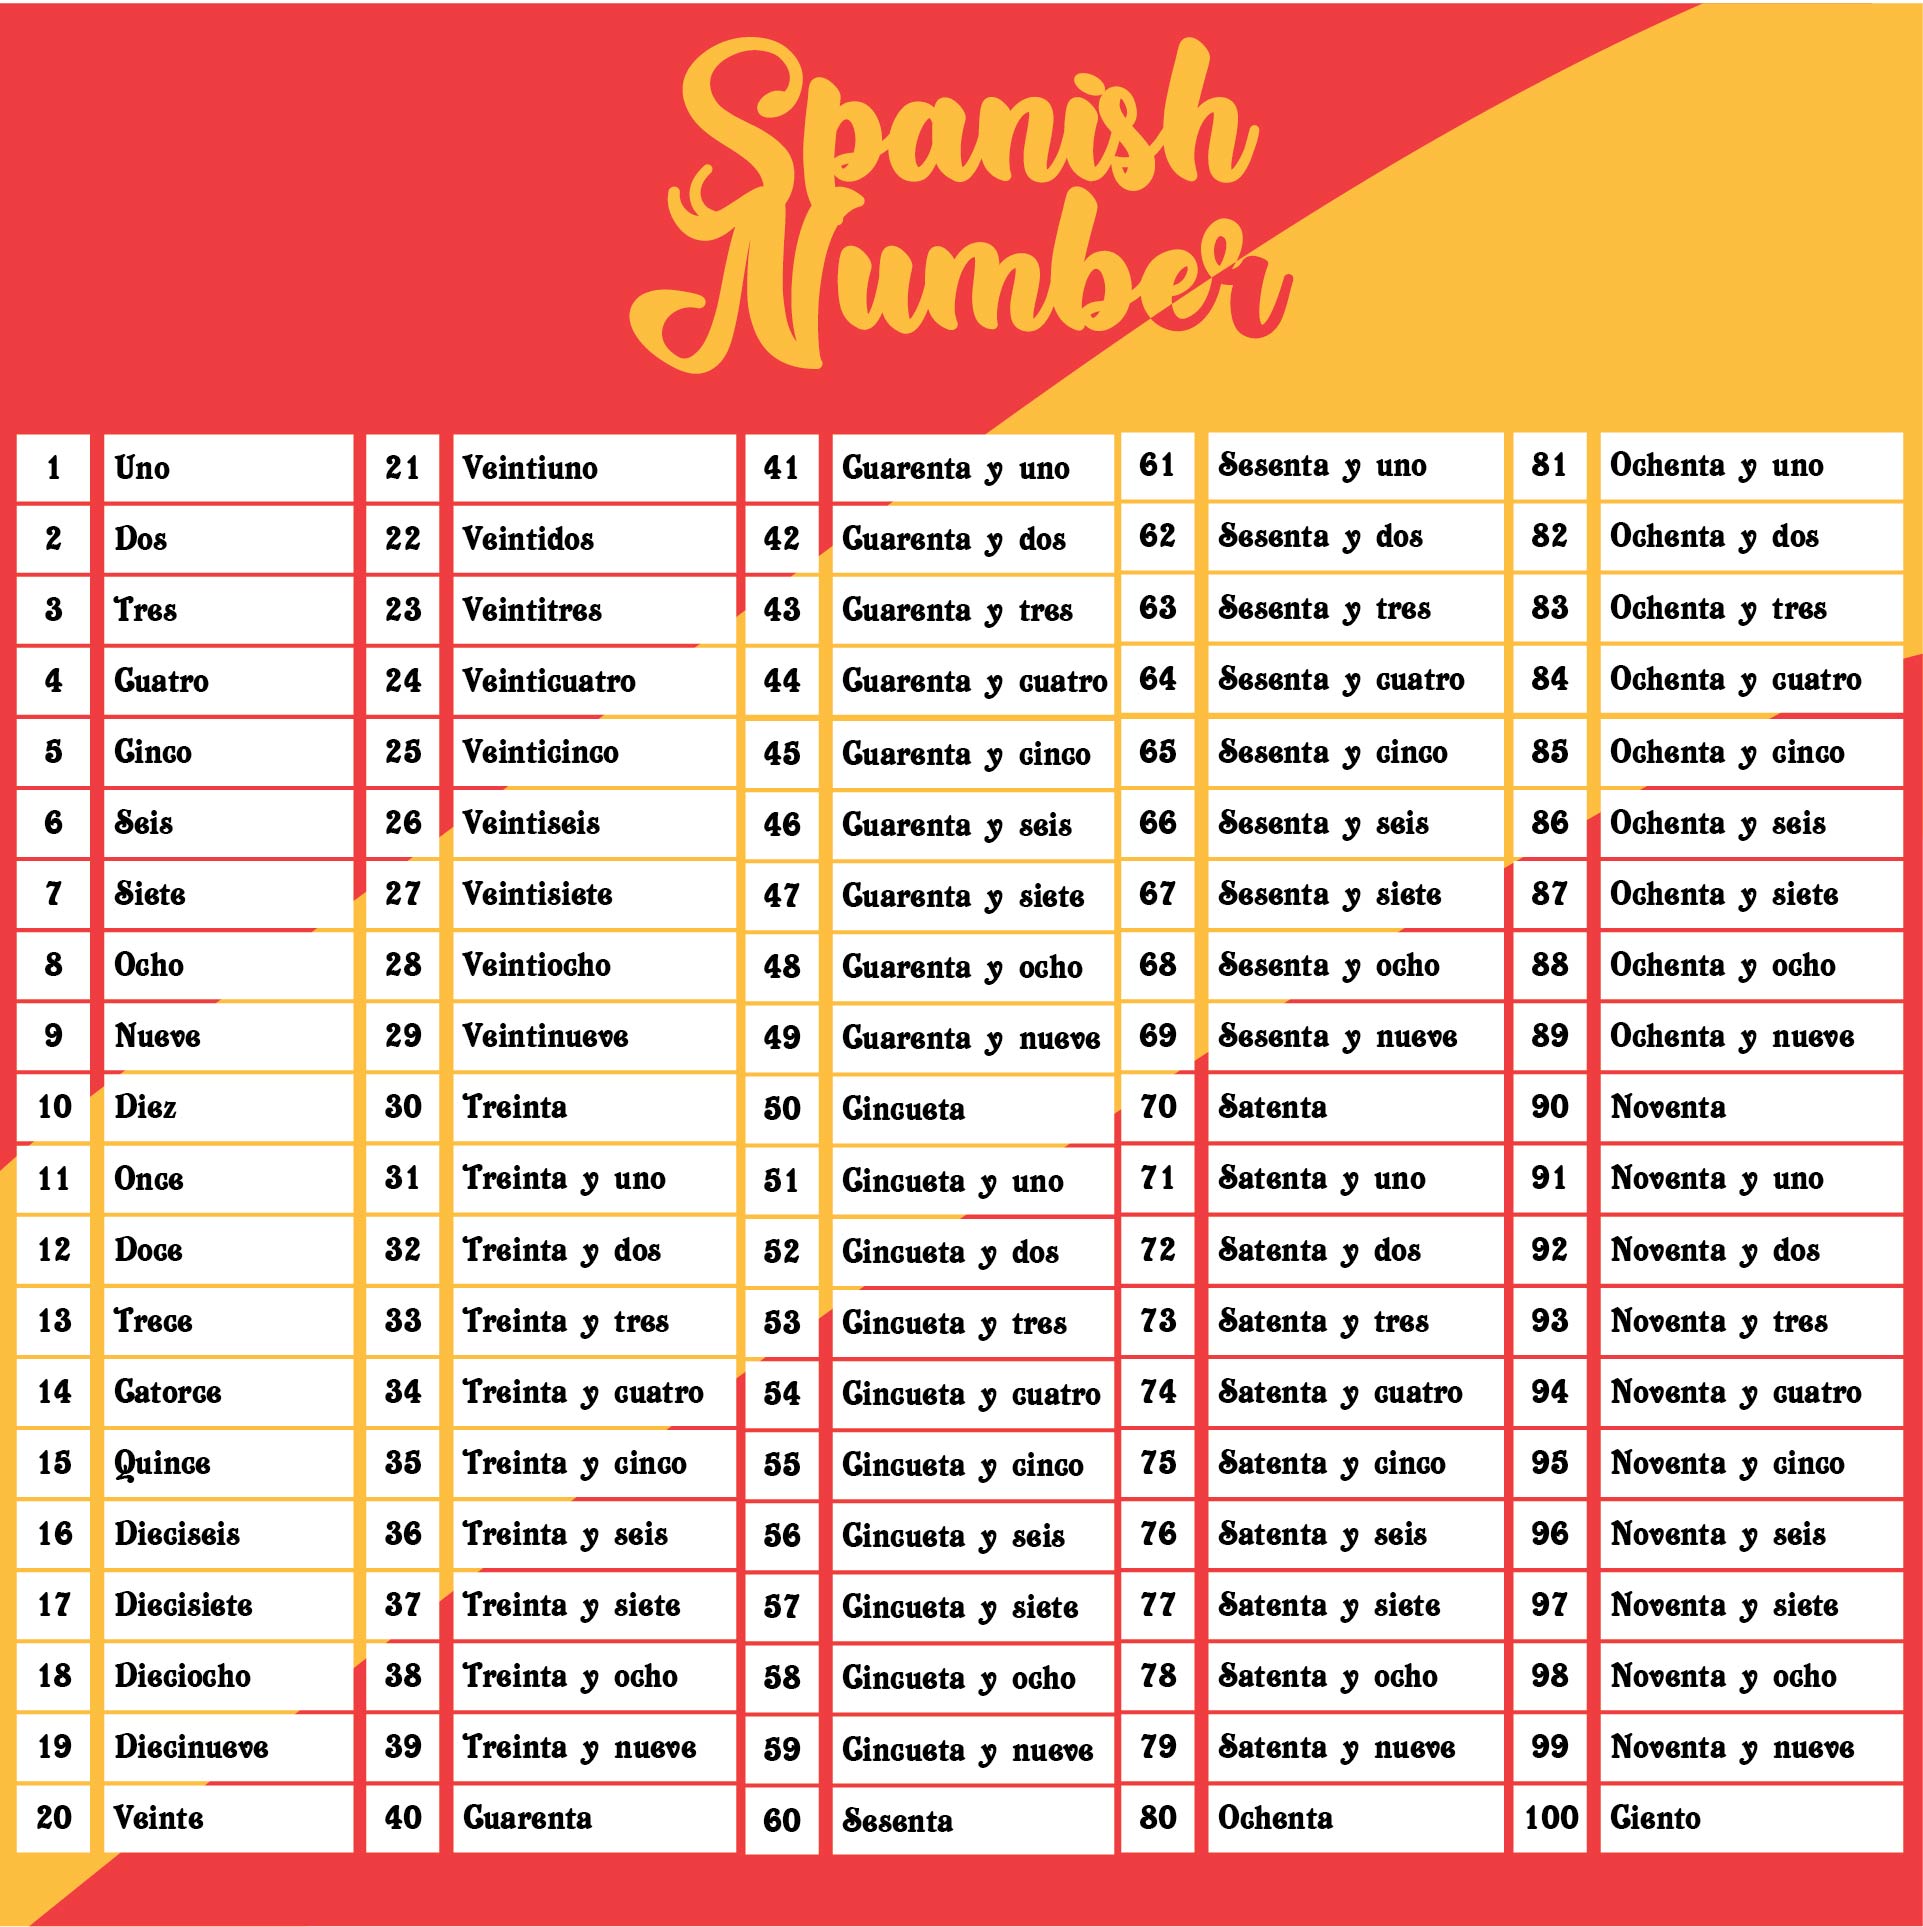 5-best-images-of-spanish-numbers-1-50-printable-spanish-numbers-1-50